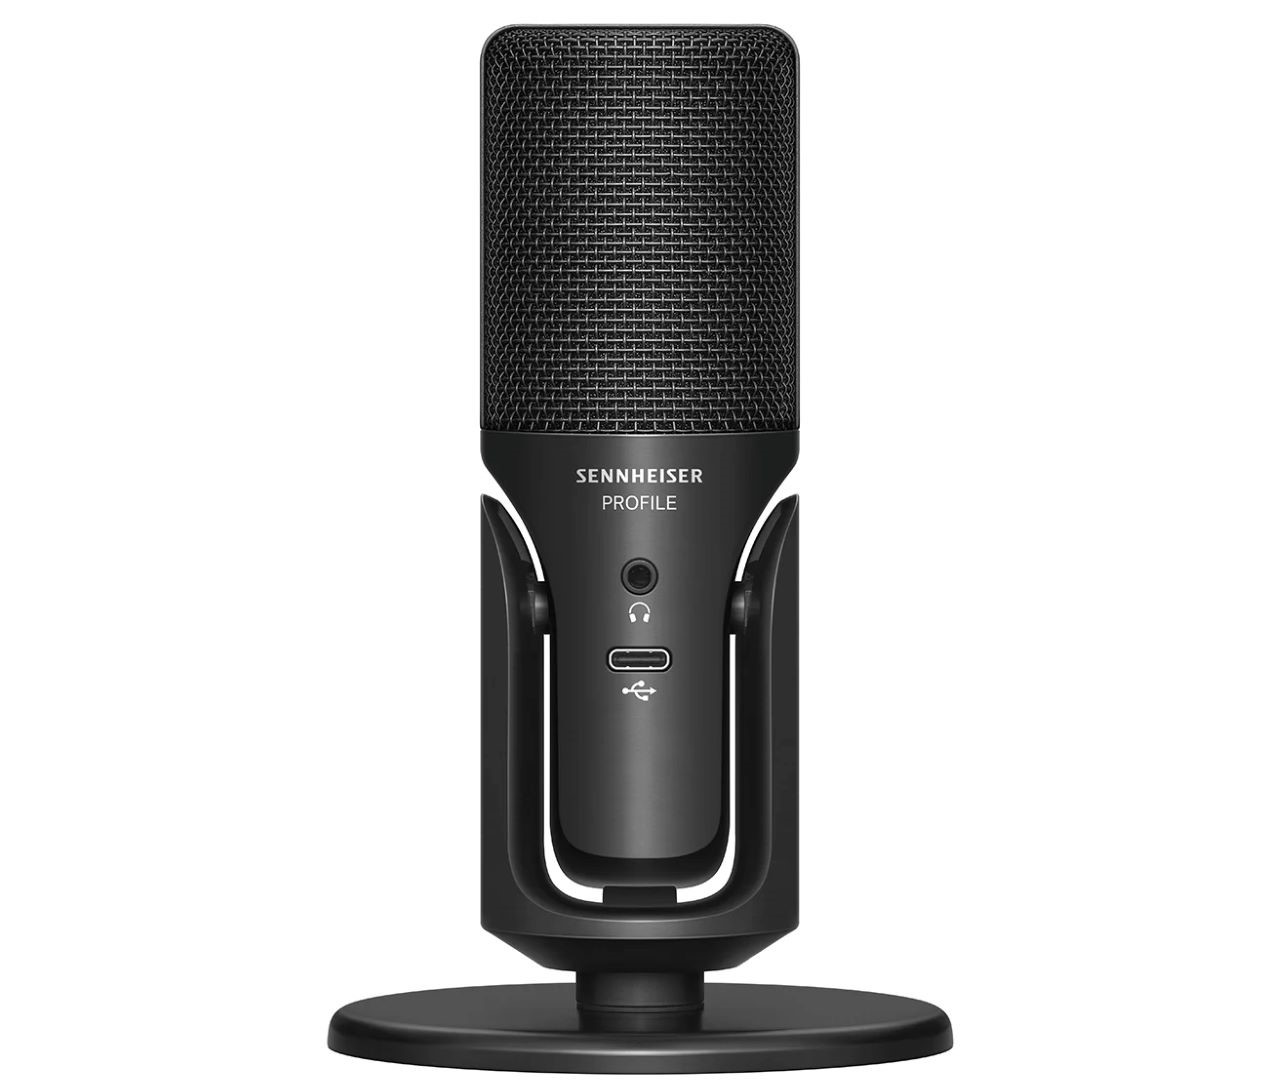 Profile, one of Shure MV7 alternatives, is a USB-C microphone with cardioid condenser capsule and integrated features for enhanced Podcasting and Streaming applications.